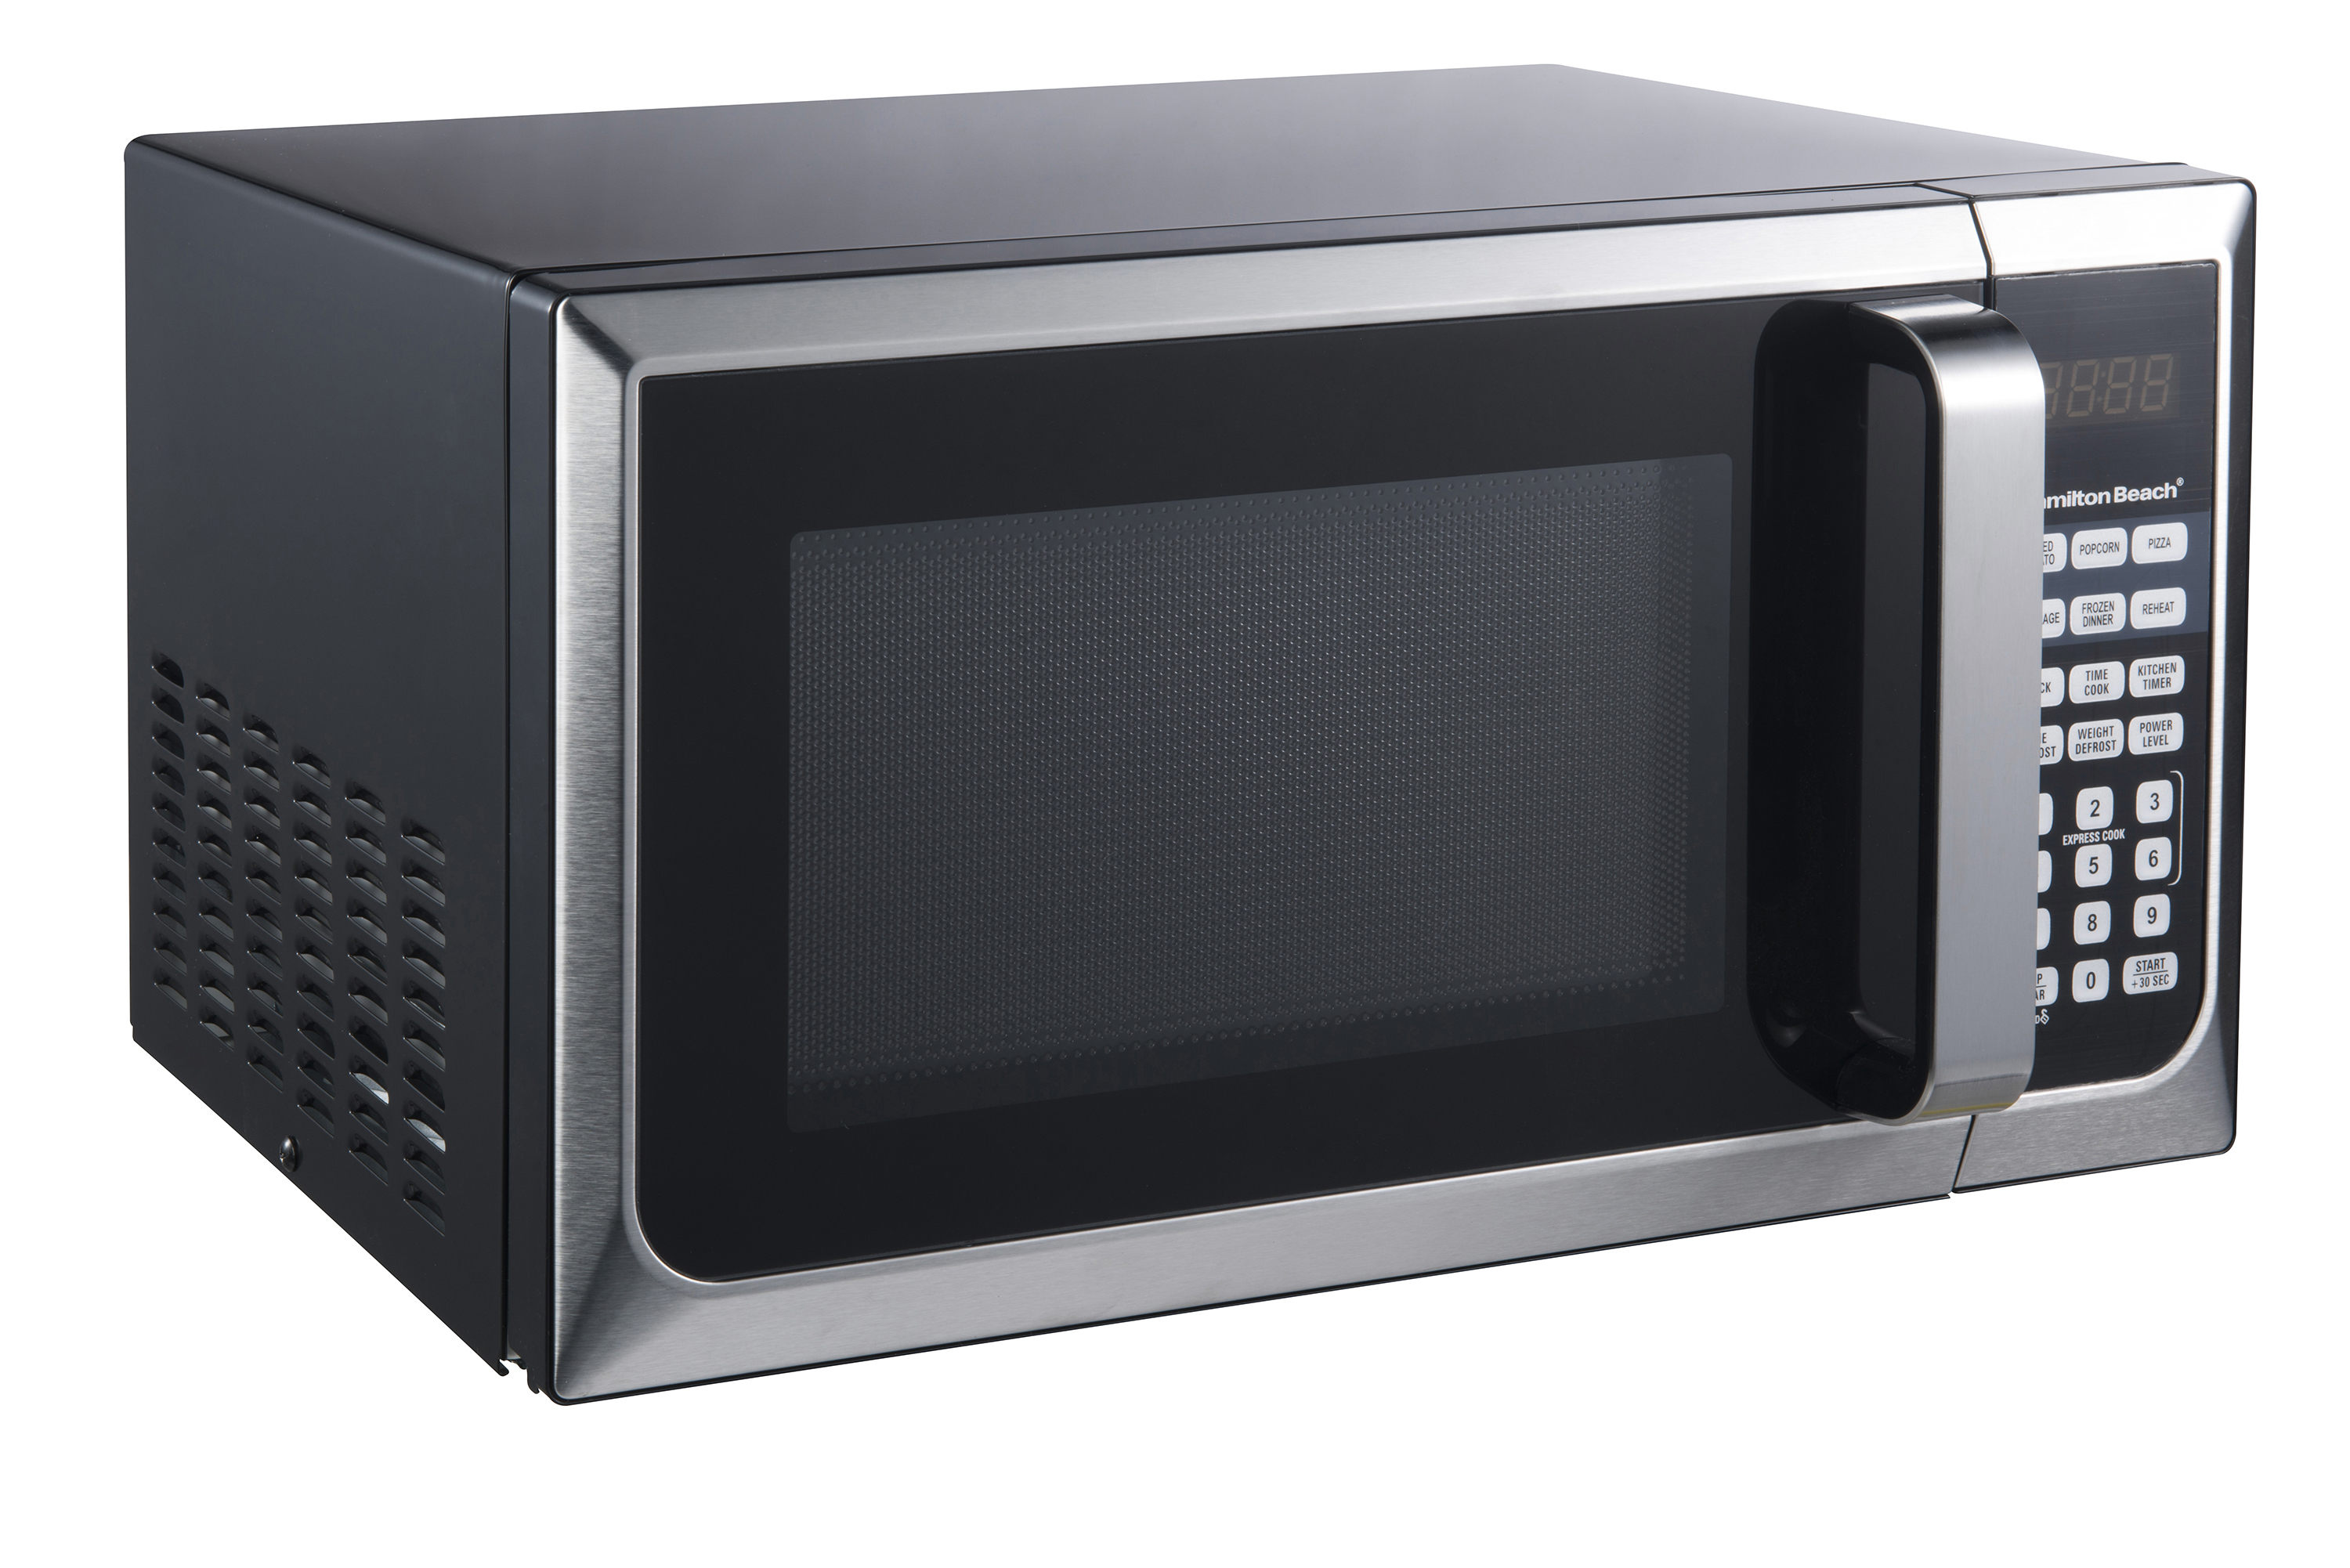 Hamilton Beach 0.9 Cu ft Countertop Microwave Oven in Stainless Steel, New - image 3 of 7